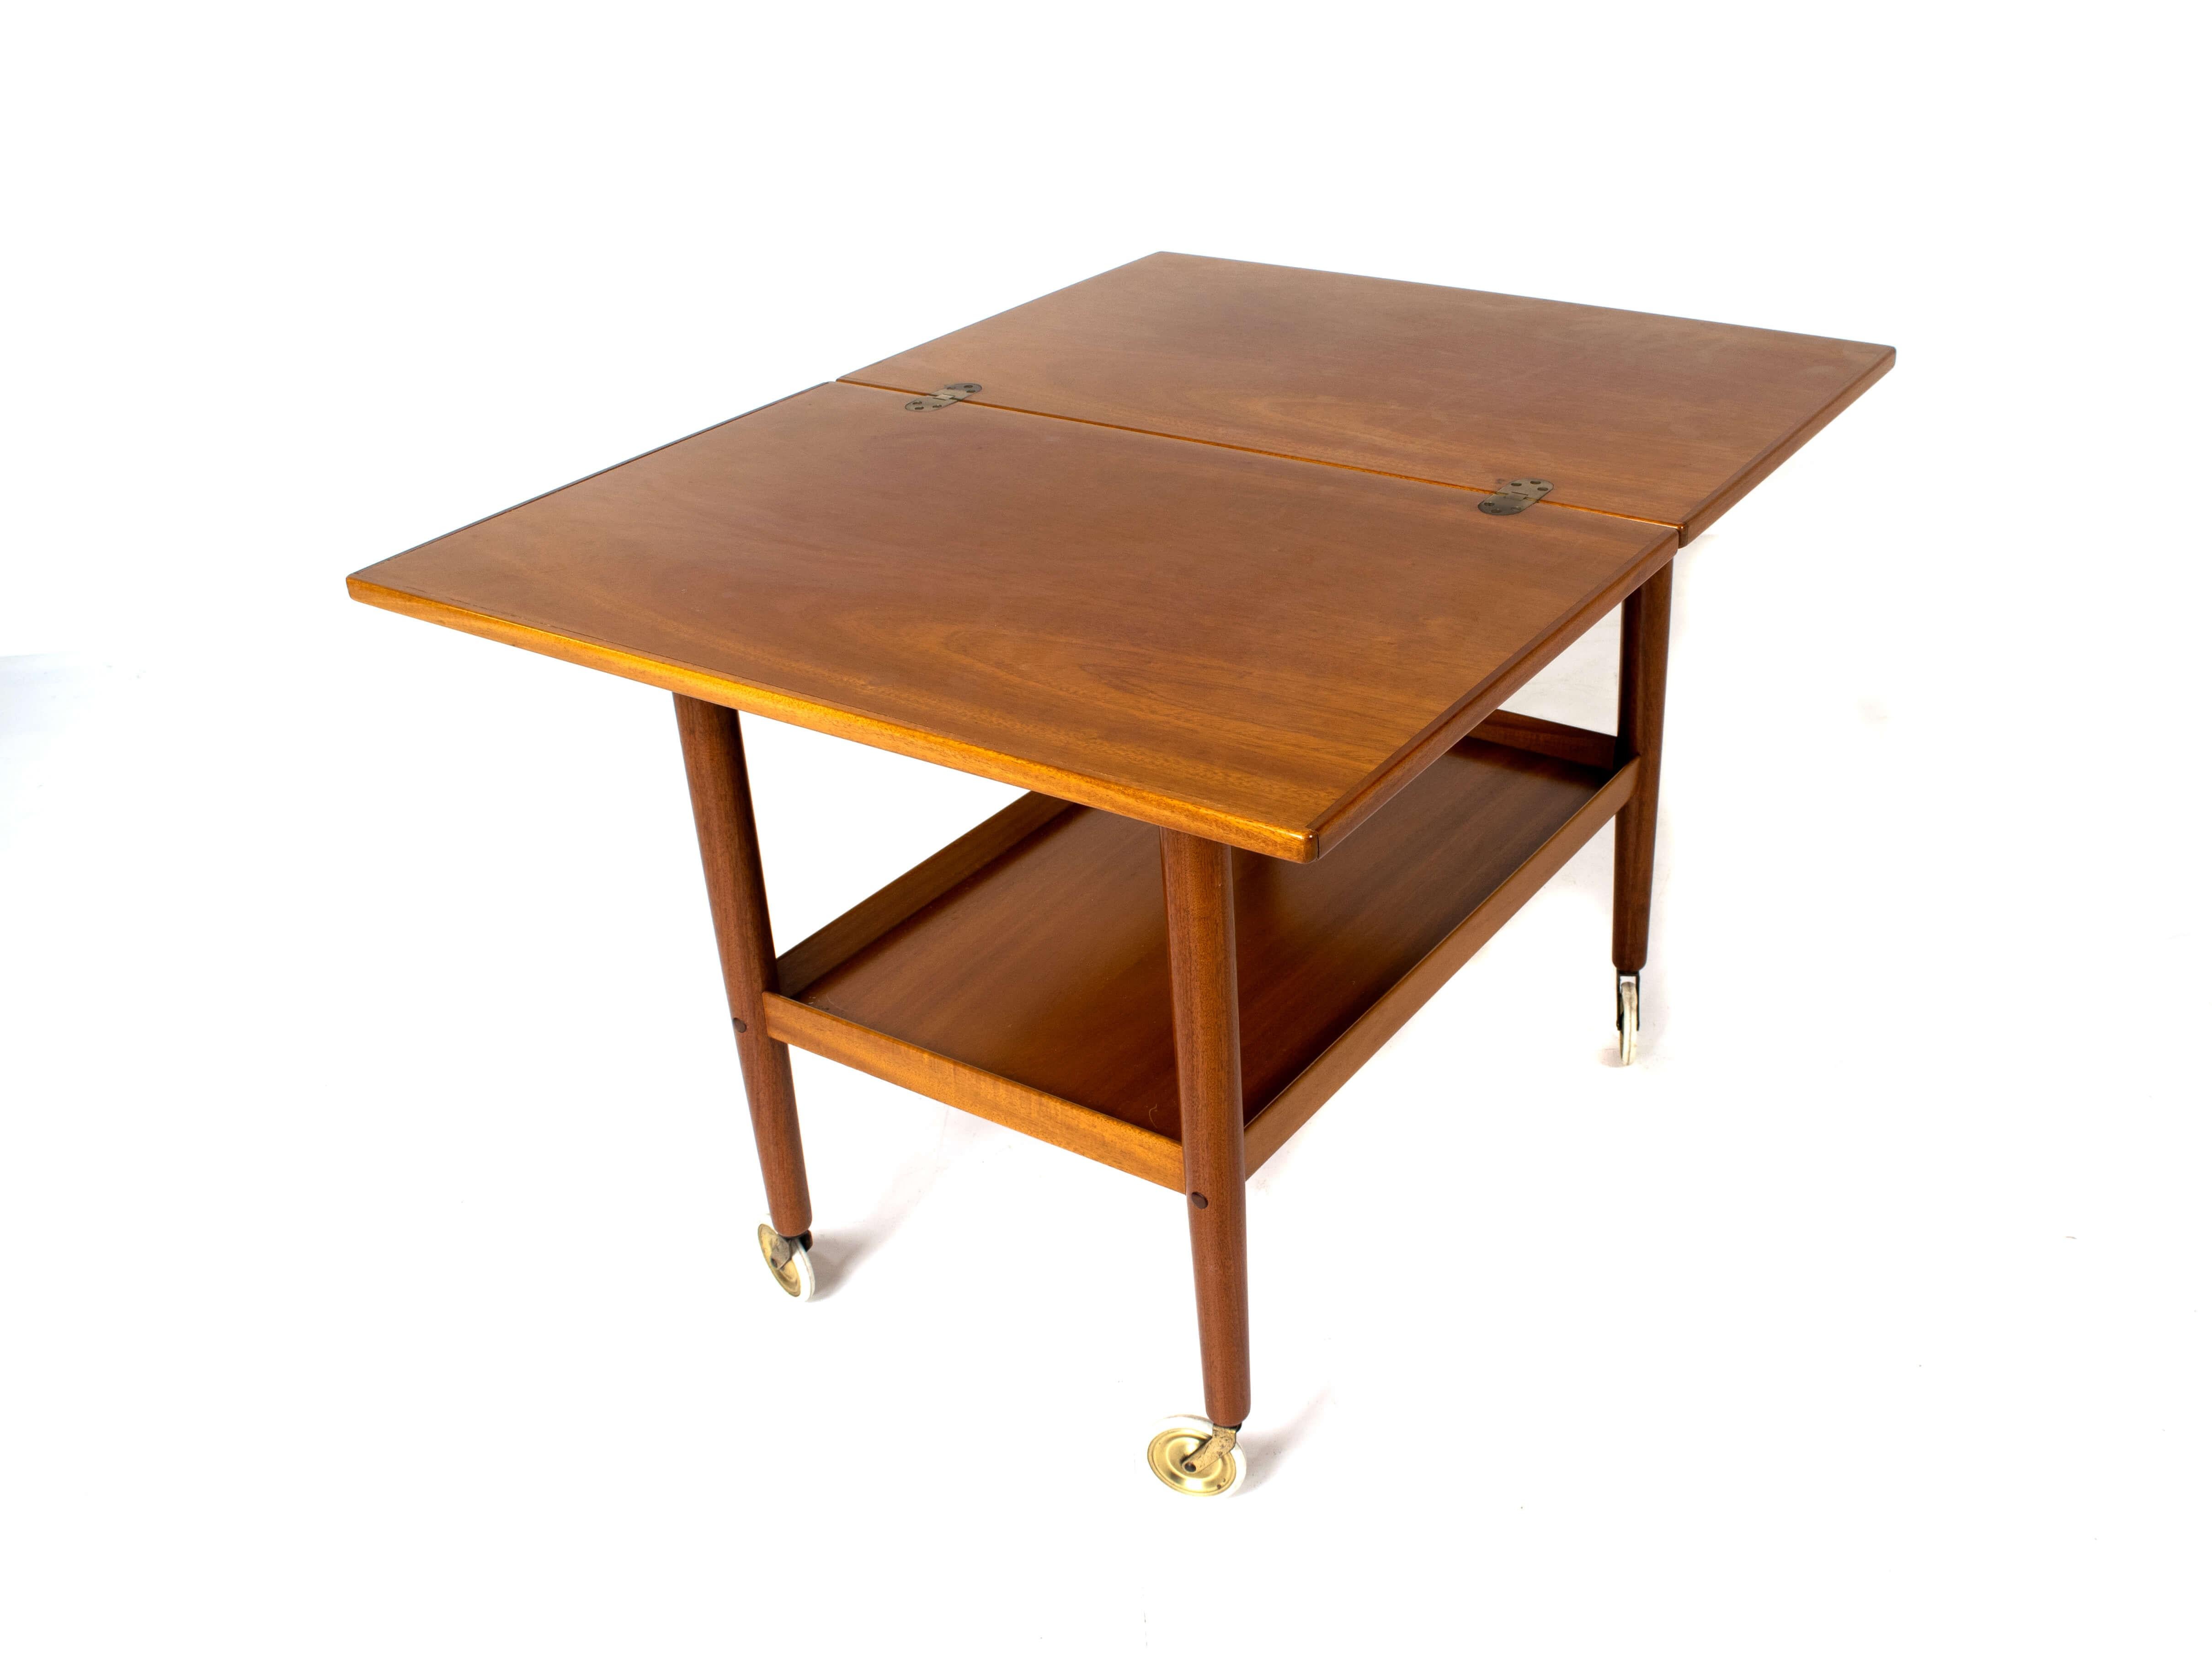 Nice Ole Wanscher serving trolley for P. Jeppesens Mobelfabrik from Denmark 1960's. This serving trolley has a top that can be folded-out to make the top twice as large; from 45 to 90 cm. The mahogany veneer is in good condition and the trolley has